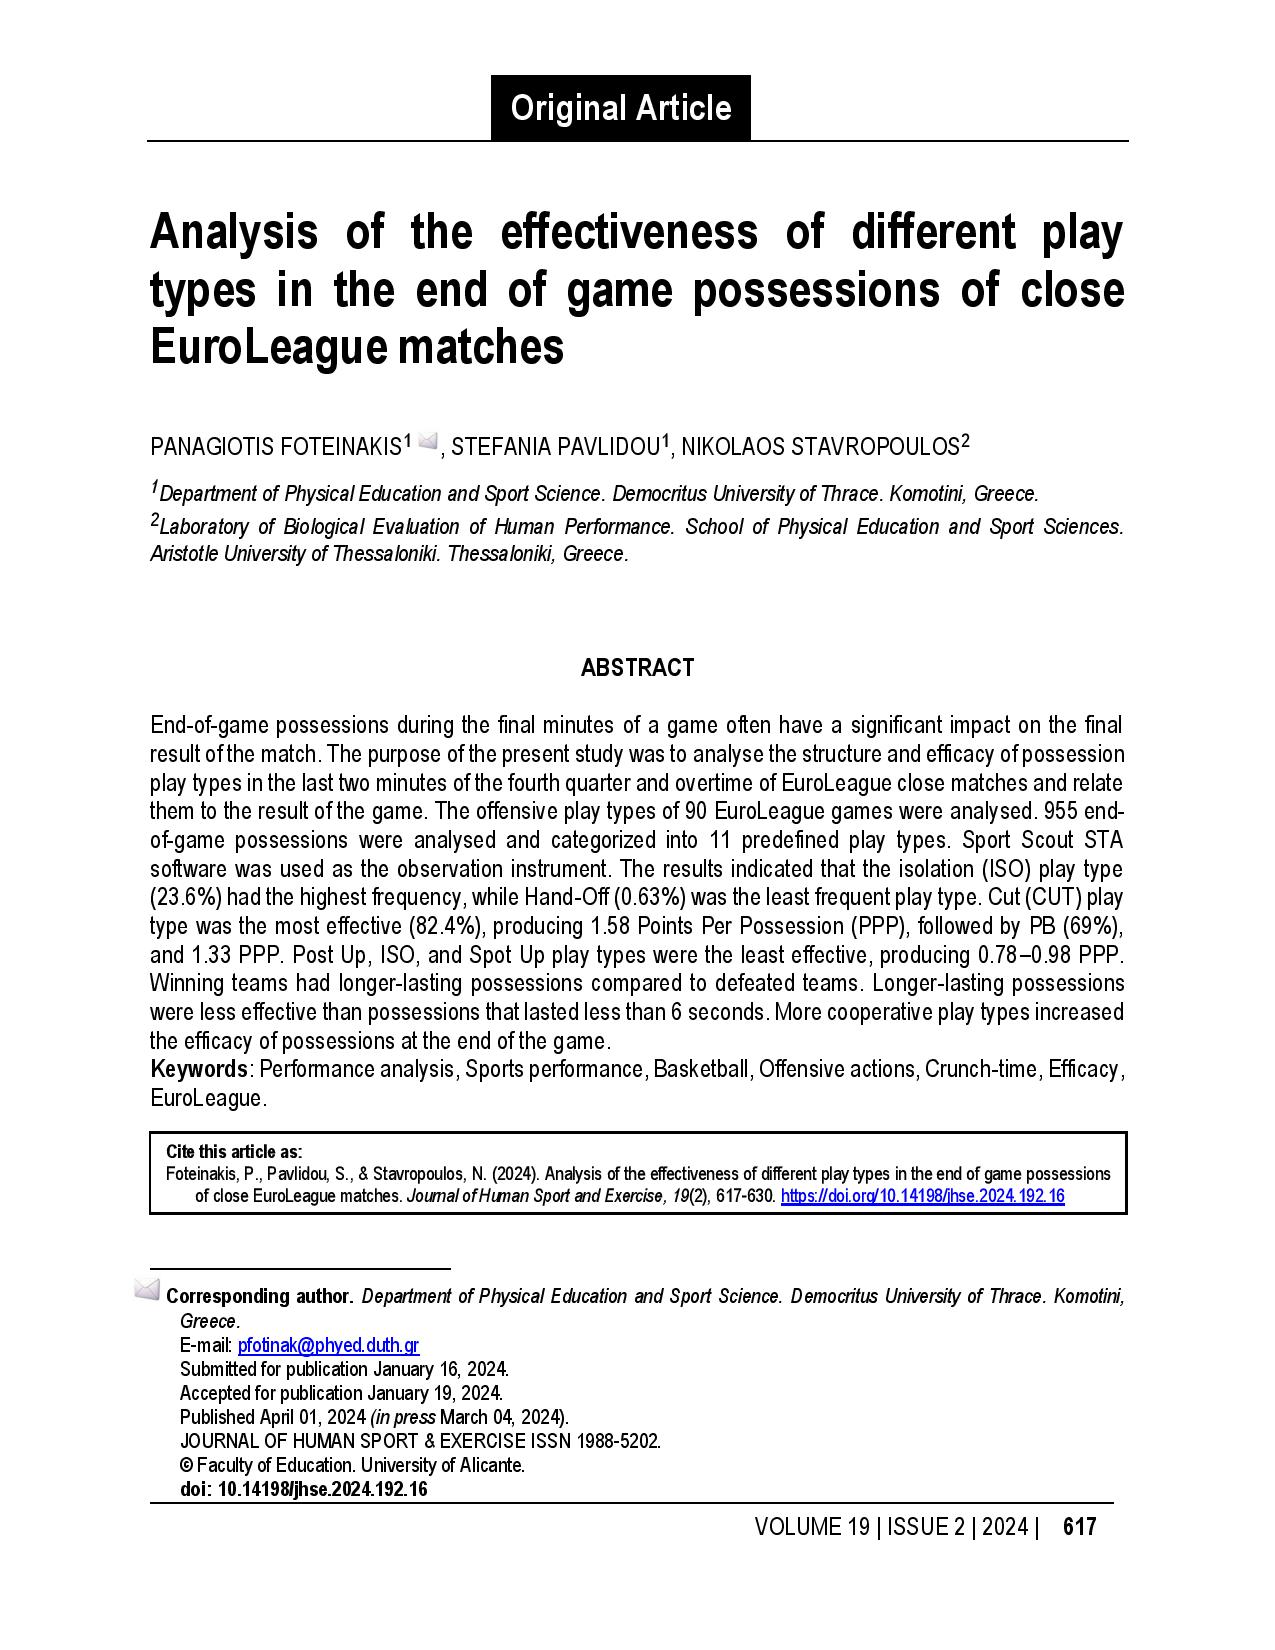 Analysis of the effectiveness of different play types in the end of game possessions of close EuroLeague matches